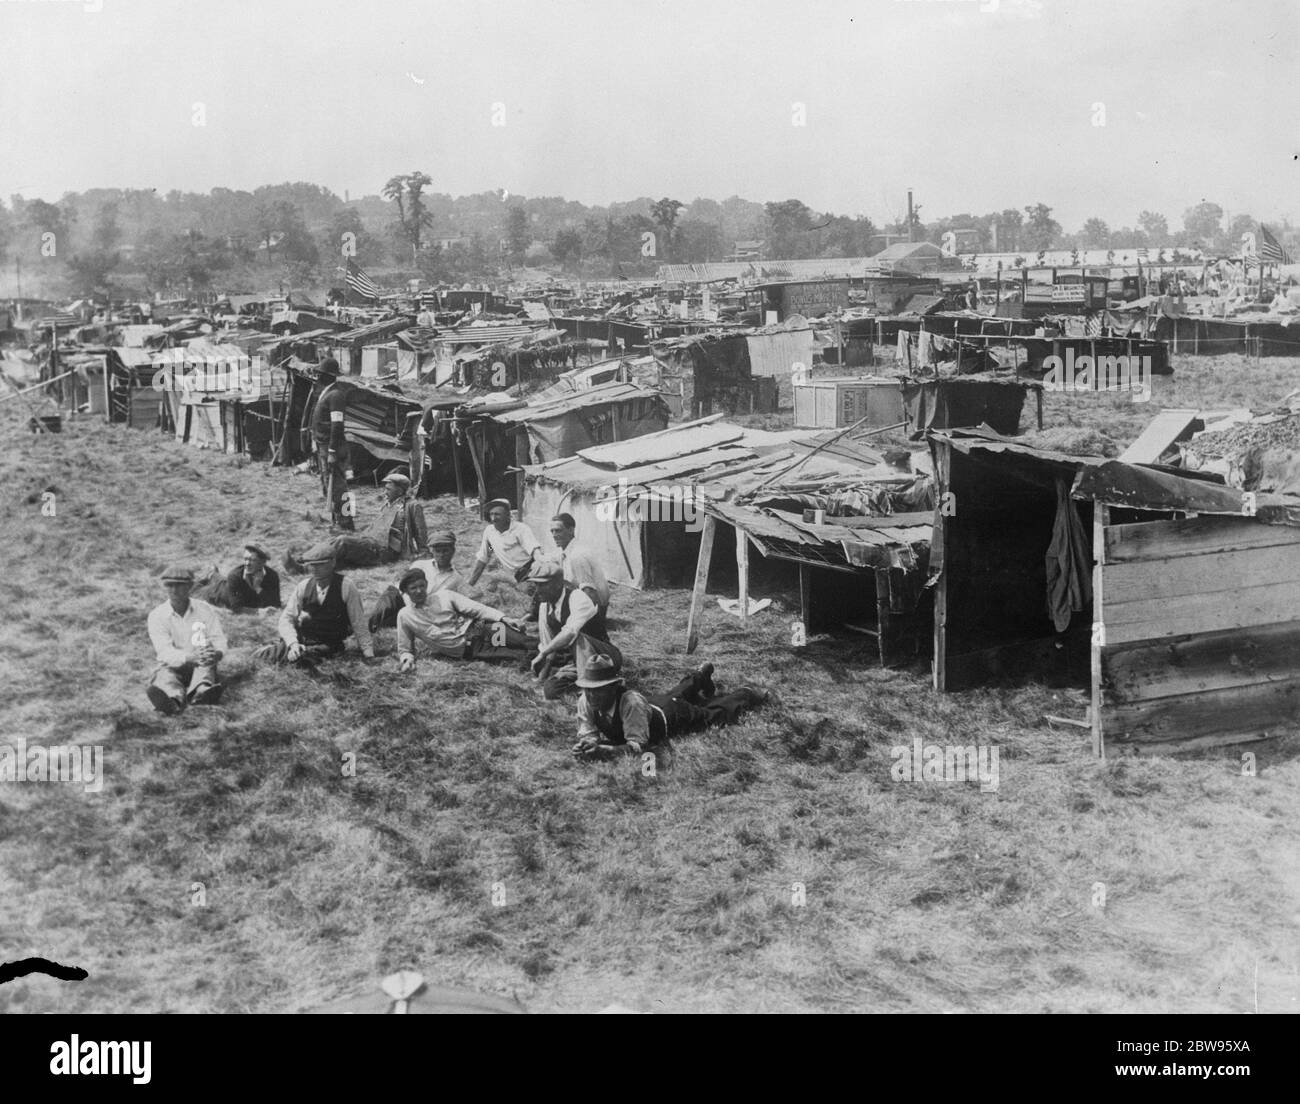 State troops rout bonus army veterans and burn camp at Washington . State toops routed several thousand Bonus Army Veterans , who have been in camp just outside Washington for the past three months , following their refusal to disperse quietly when ordered by the authorities , Their camp of shacks has been burned to the grounds . The bonus army marchers in camp at Washington from which they have been routed and their camp burned . 29 July 1932 Stock Photo